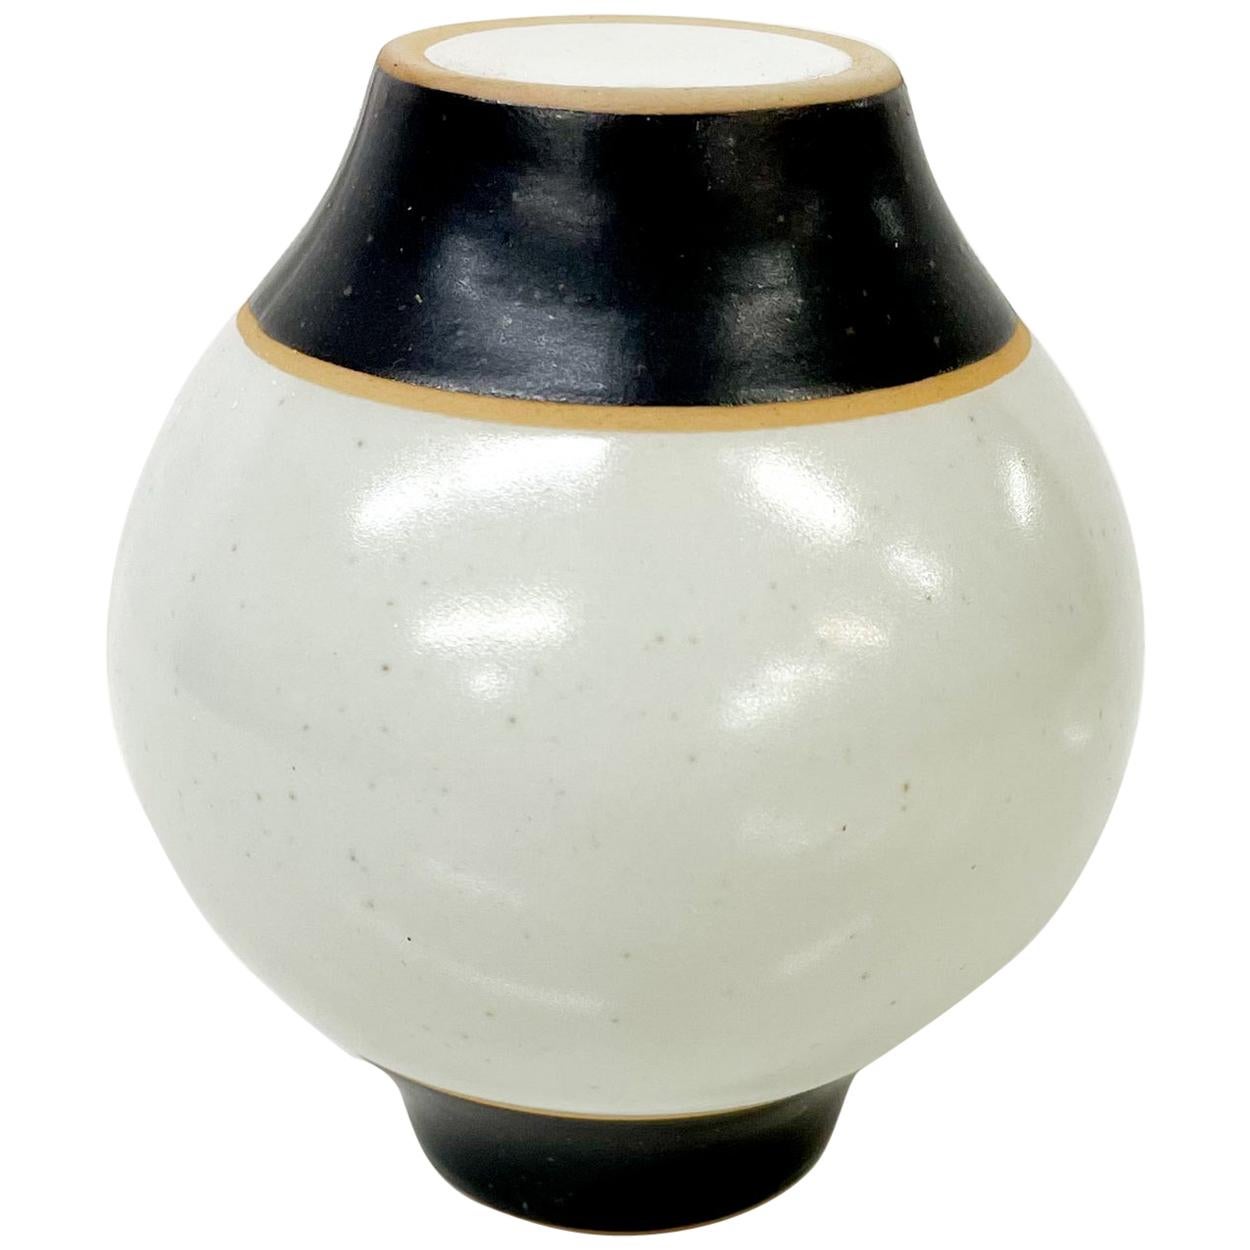 Modernist Pottery single Salt or Pepper Shaker Clean Modern Design.
3.5 tall x 3.25
Round shape with light gray tones, black and light brown stripes.
Original plastic cap underneath.
Preowned original good vintage condition
No label.
Refer to all